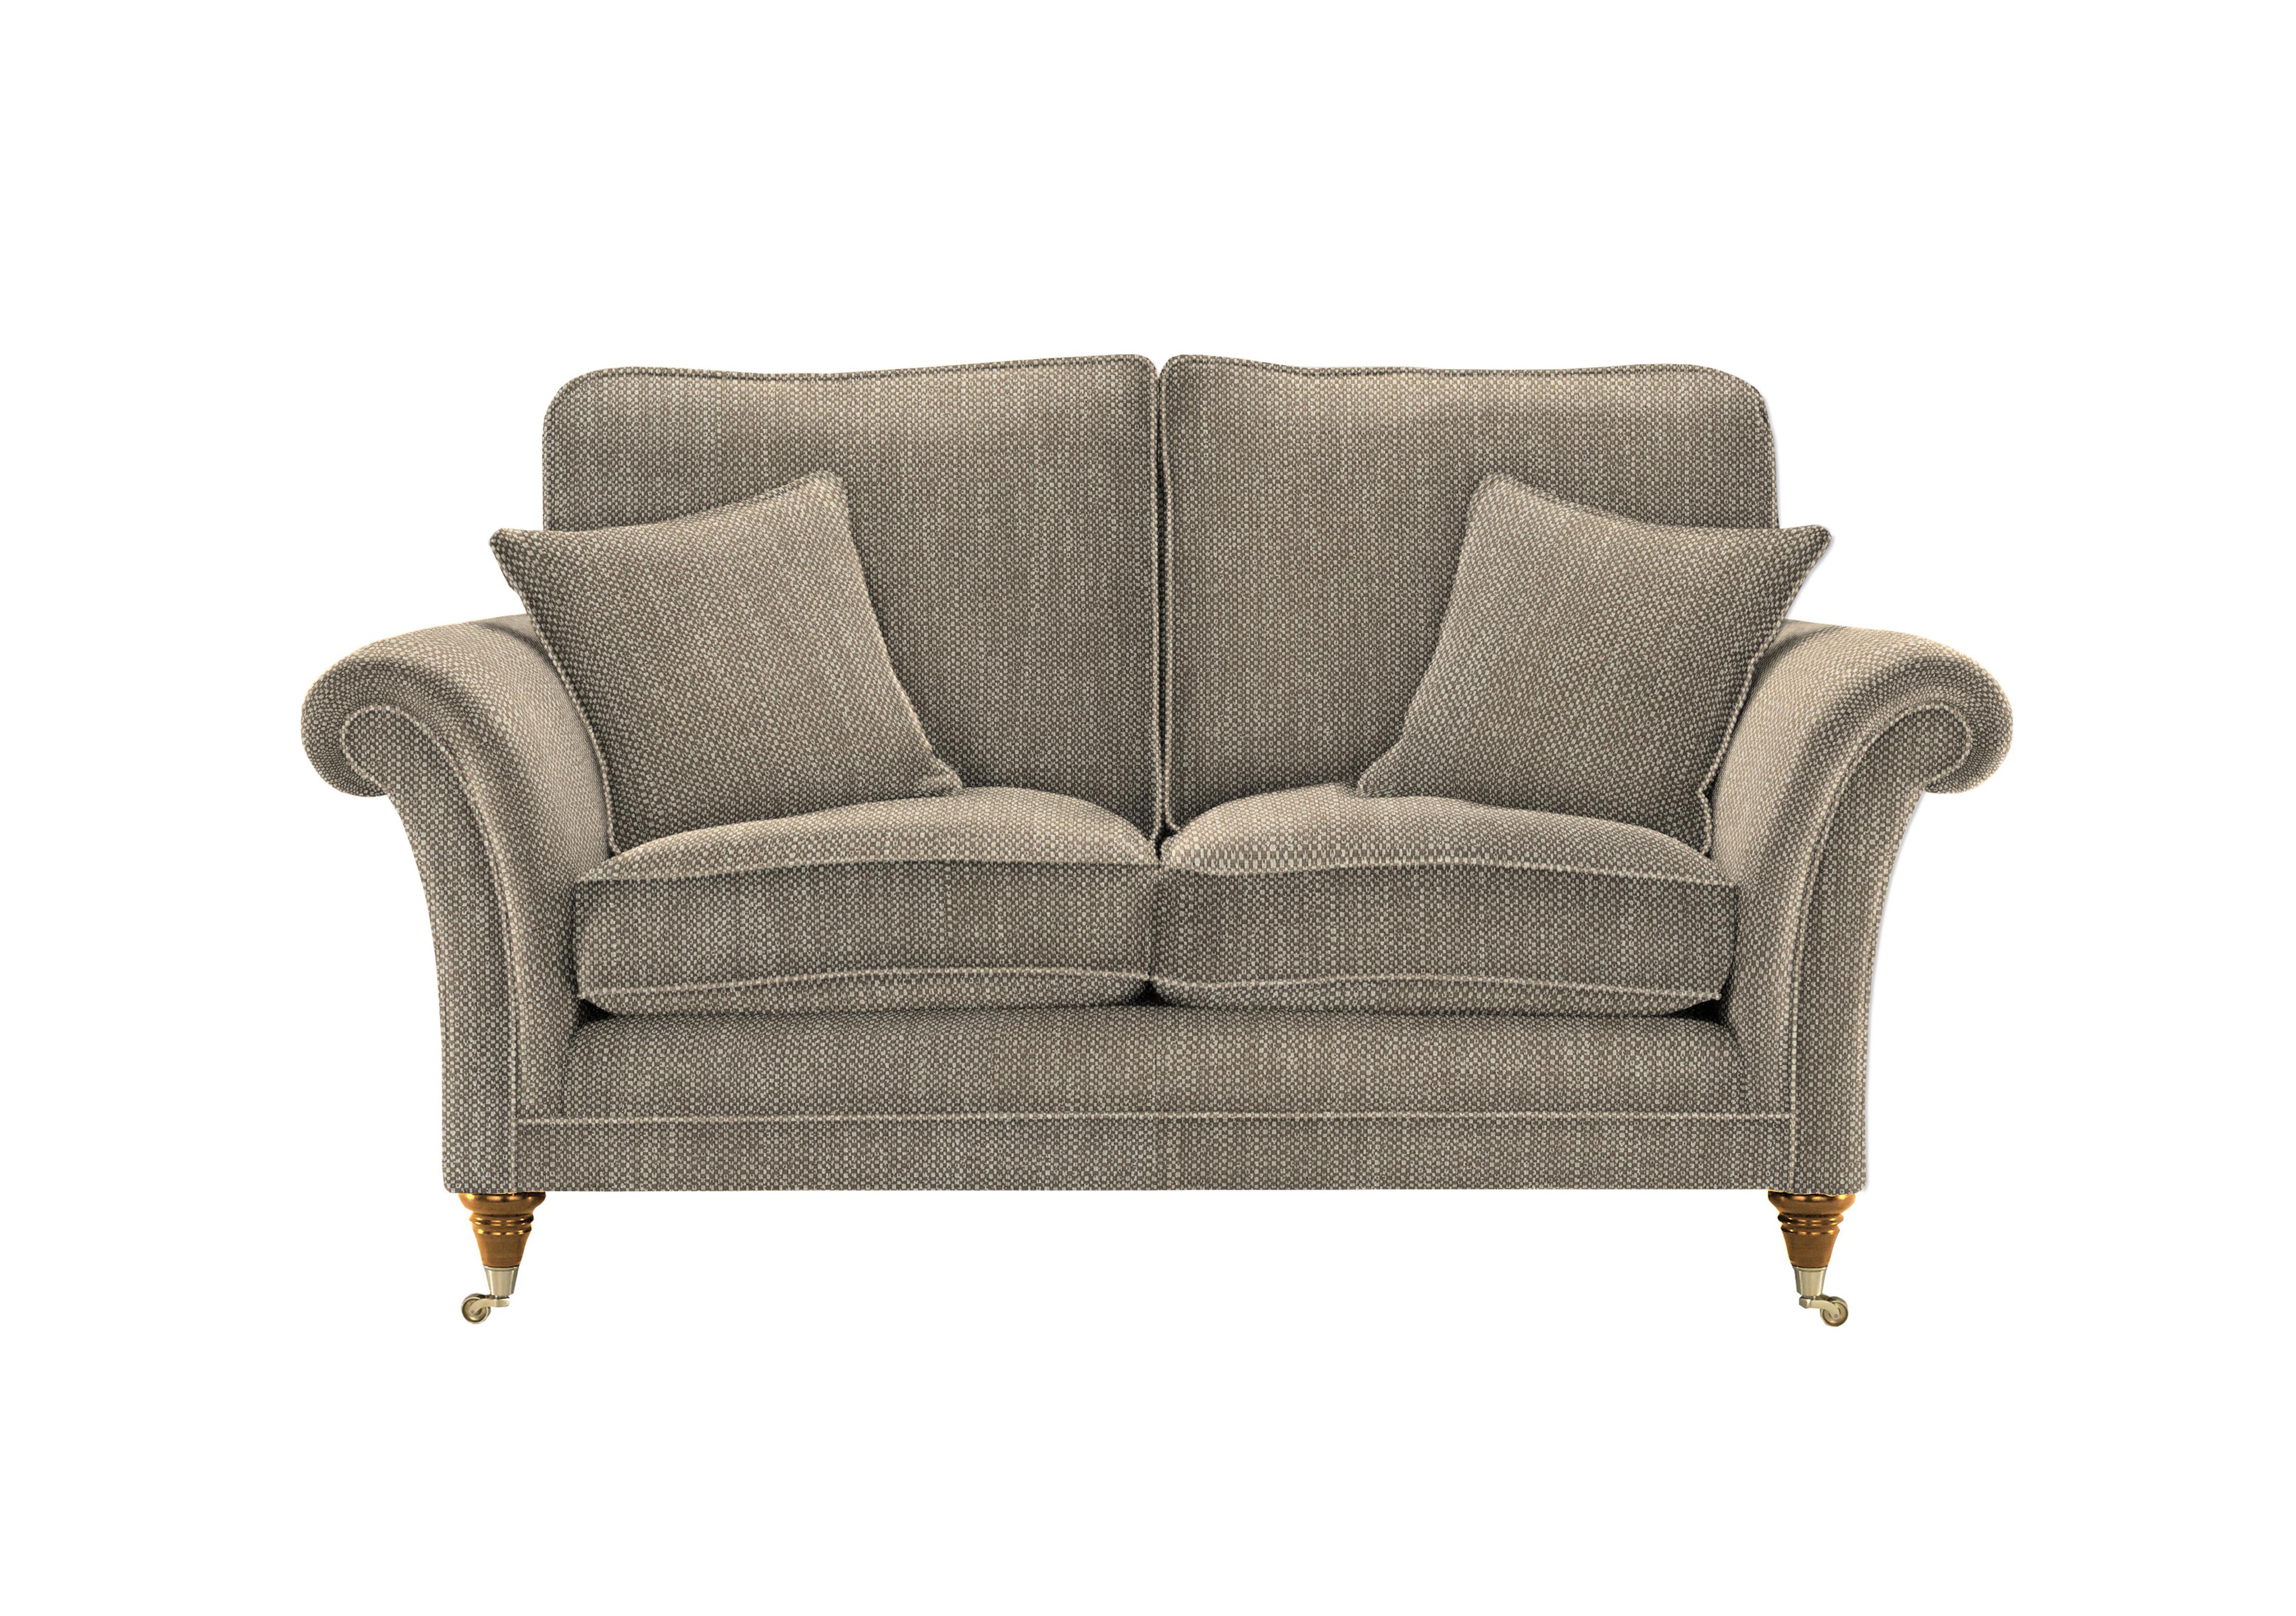 Burghley 2 Seater Fabric Sofa in 001477-0025 Metric Sable on Furniture Village